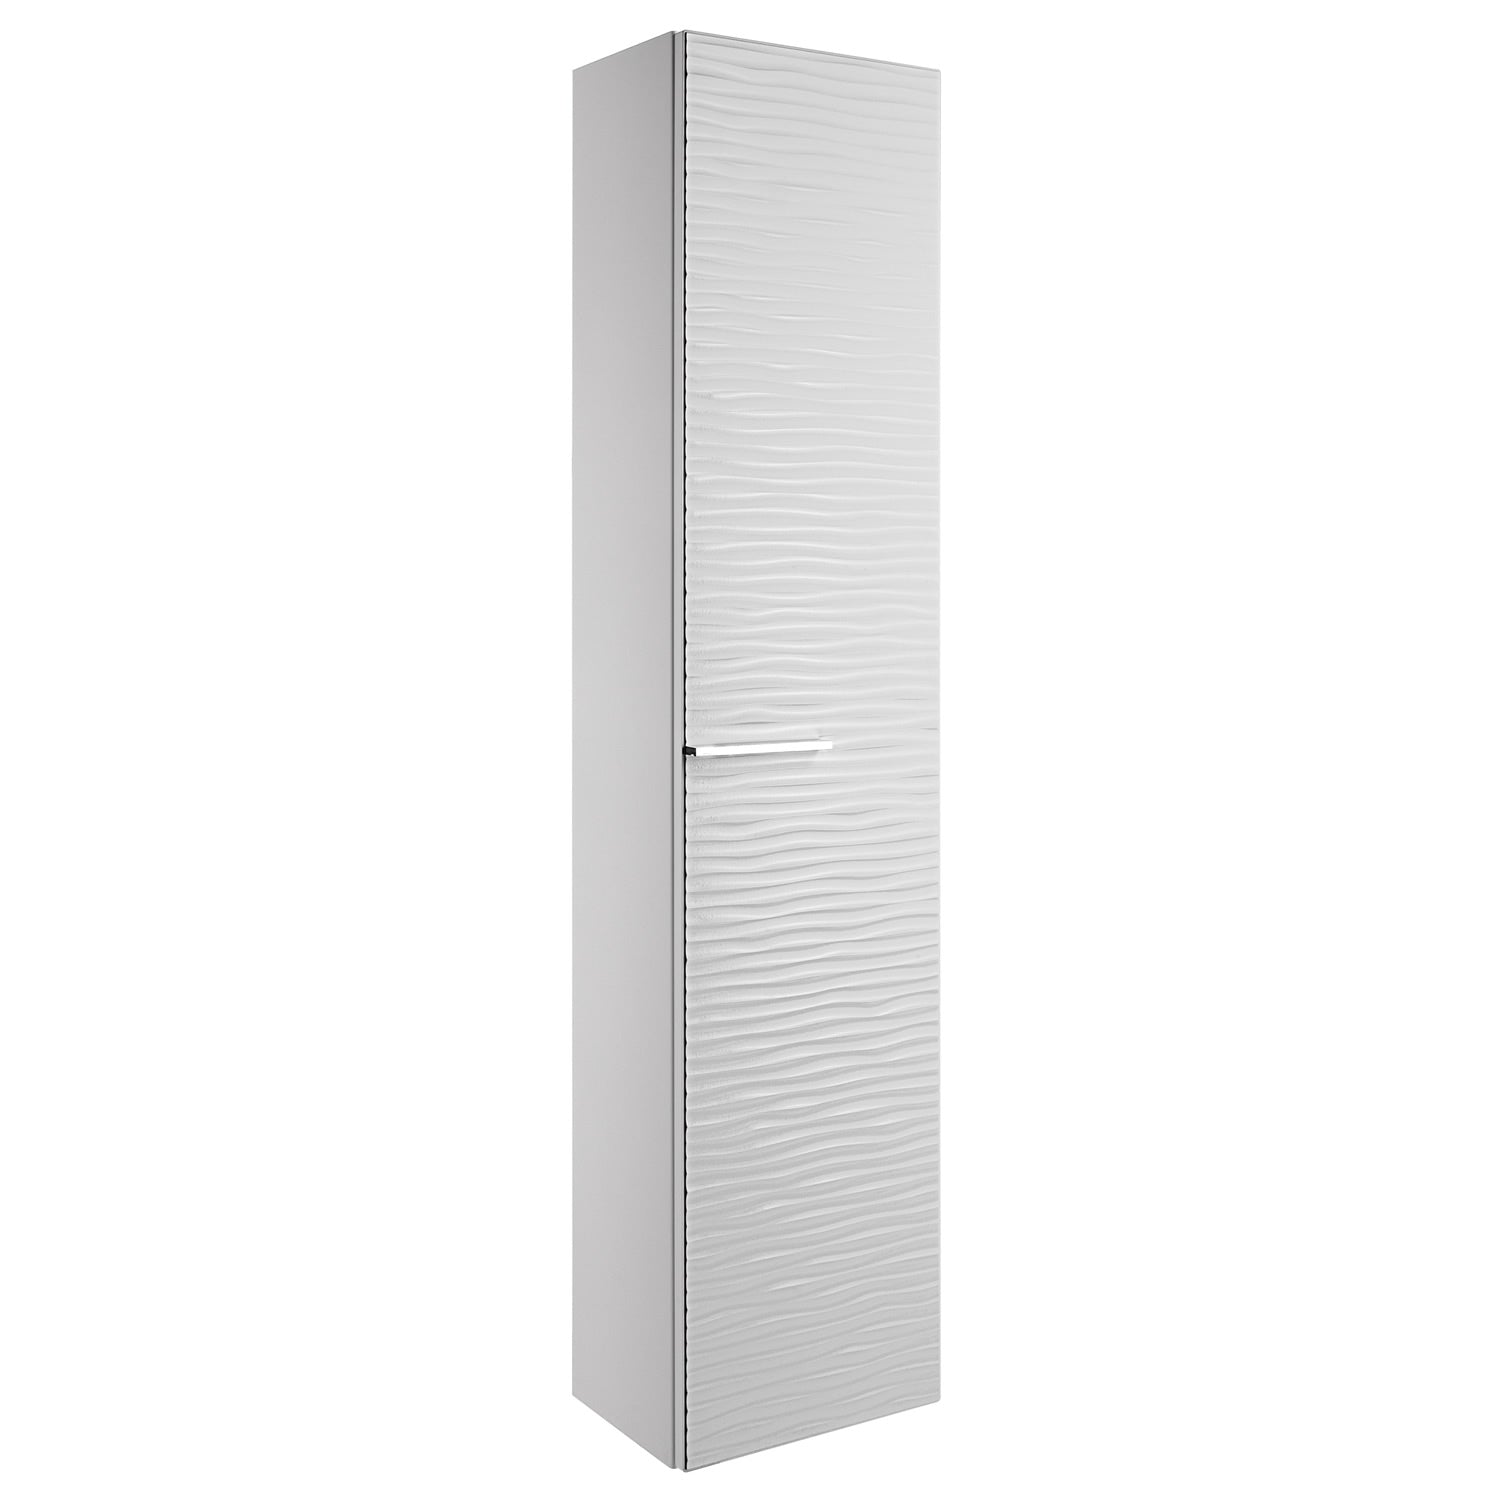 16" Tall Side Cabinet, Wall Mount, 1 Door whit Handle and Soft Close and Reversible Opening, Serie Dune by VALENZUELA